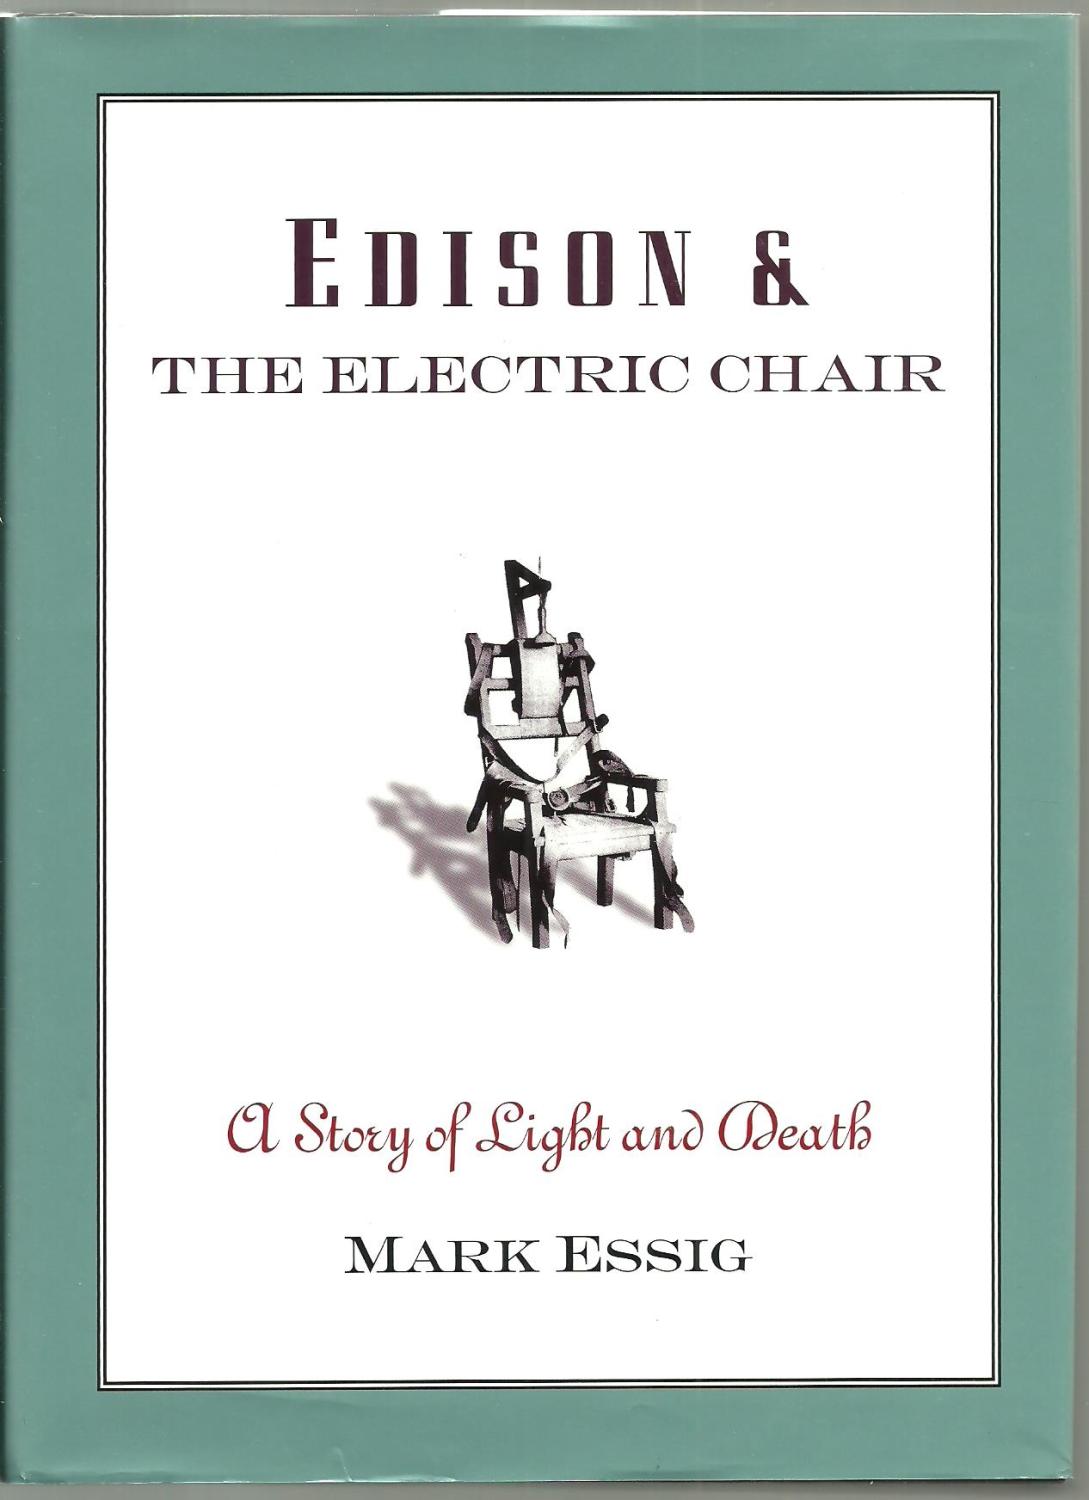 Edison & The Electric Chair: A Story of Light and Death - Mark Essig